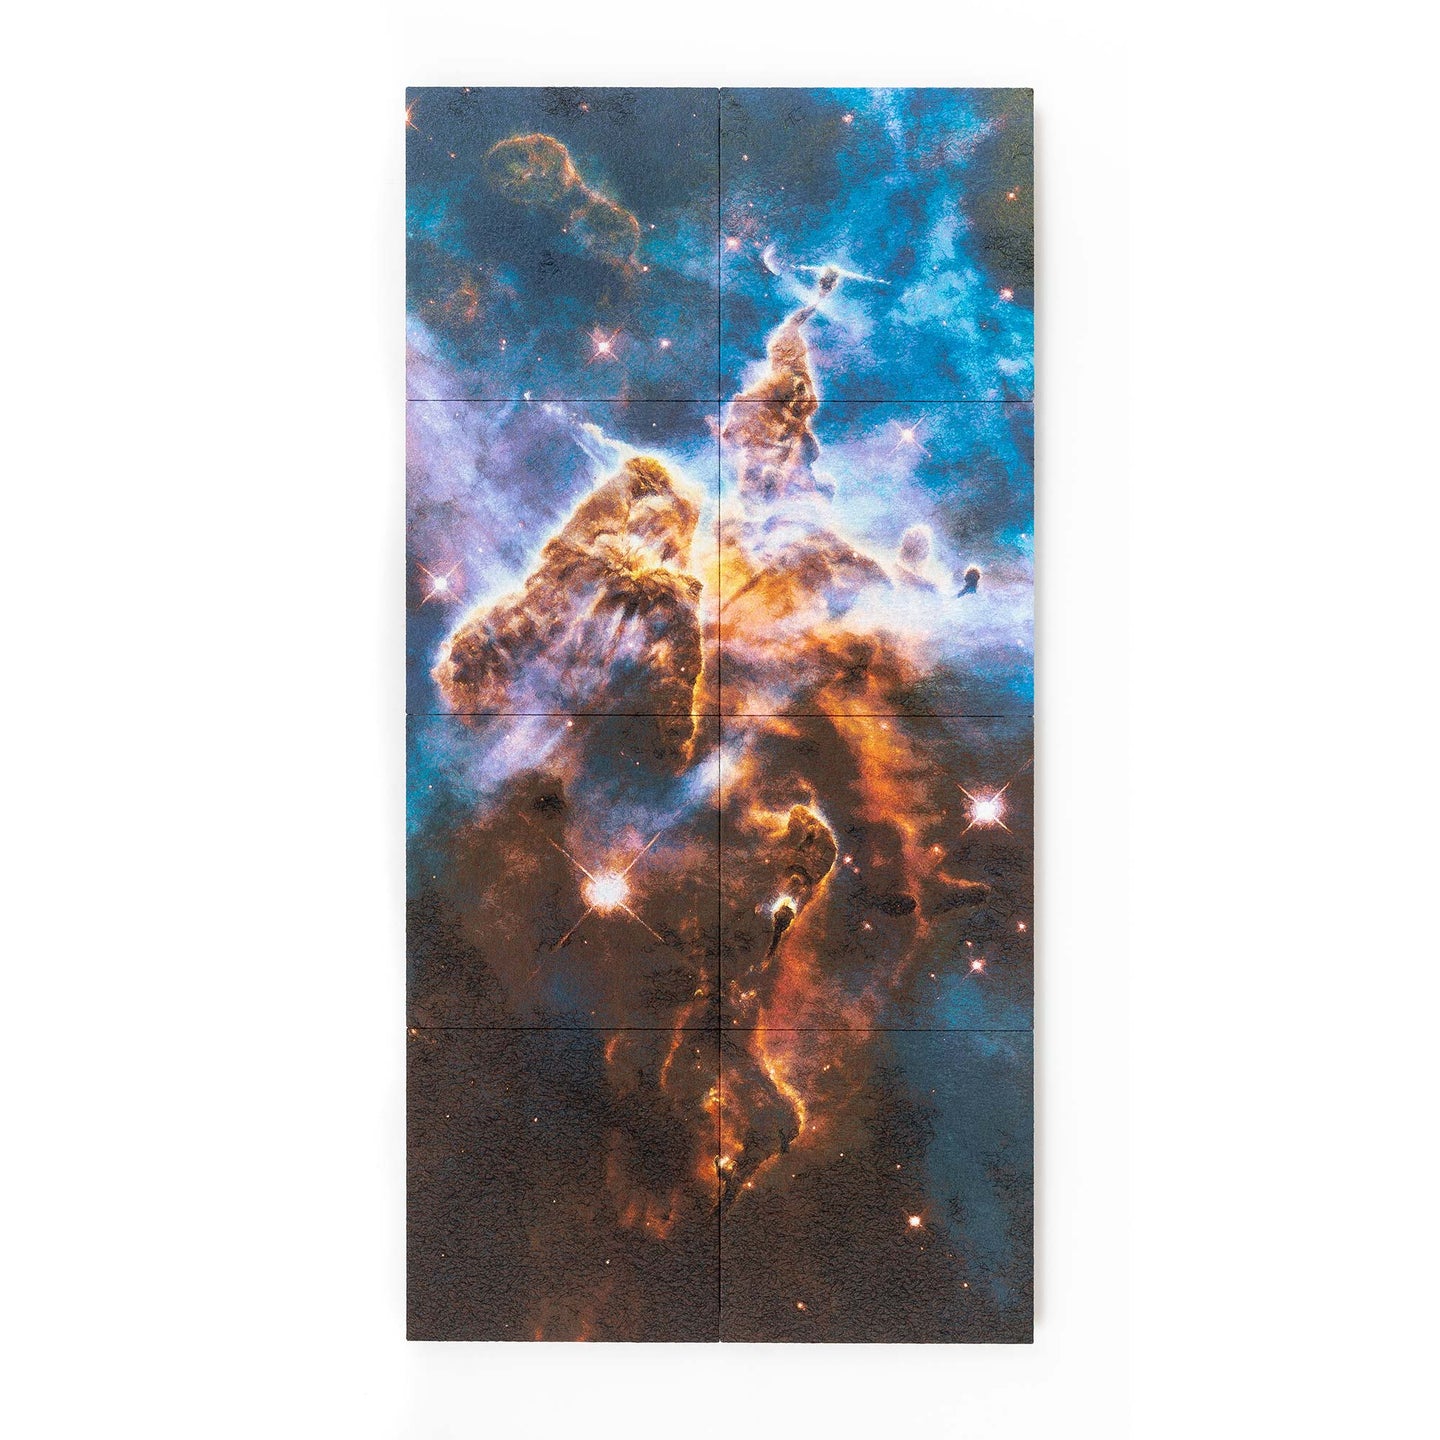 Pillars of Creation – Set of 8 embroidered canvases